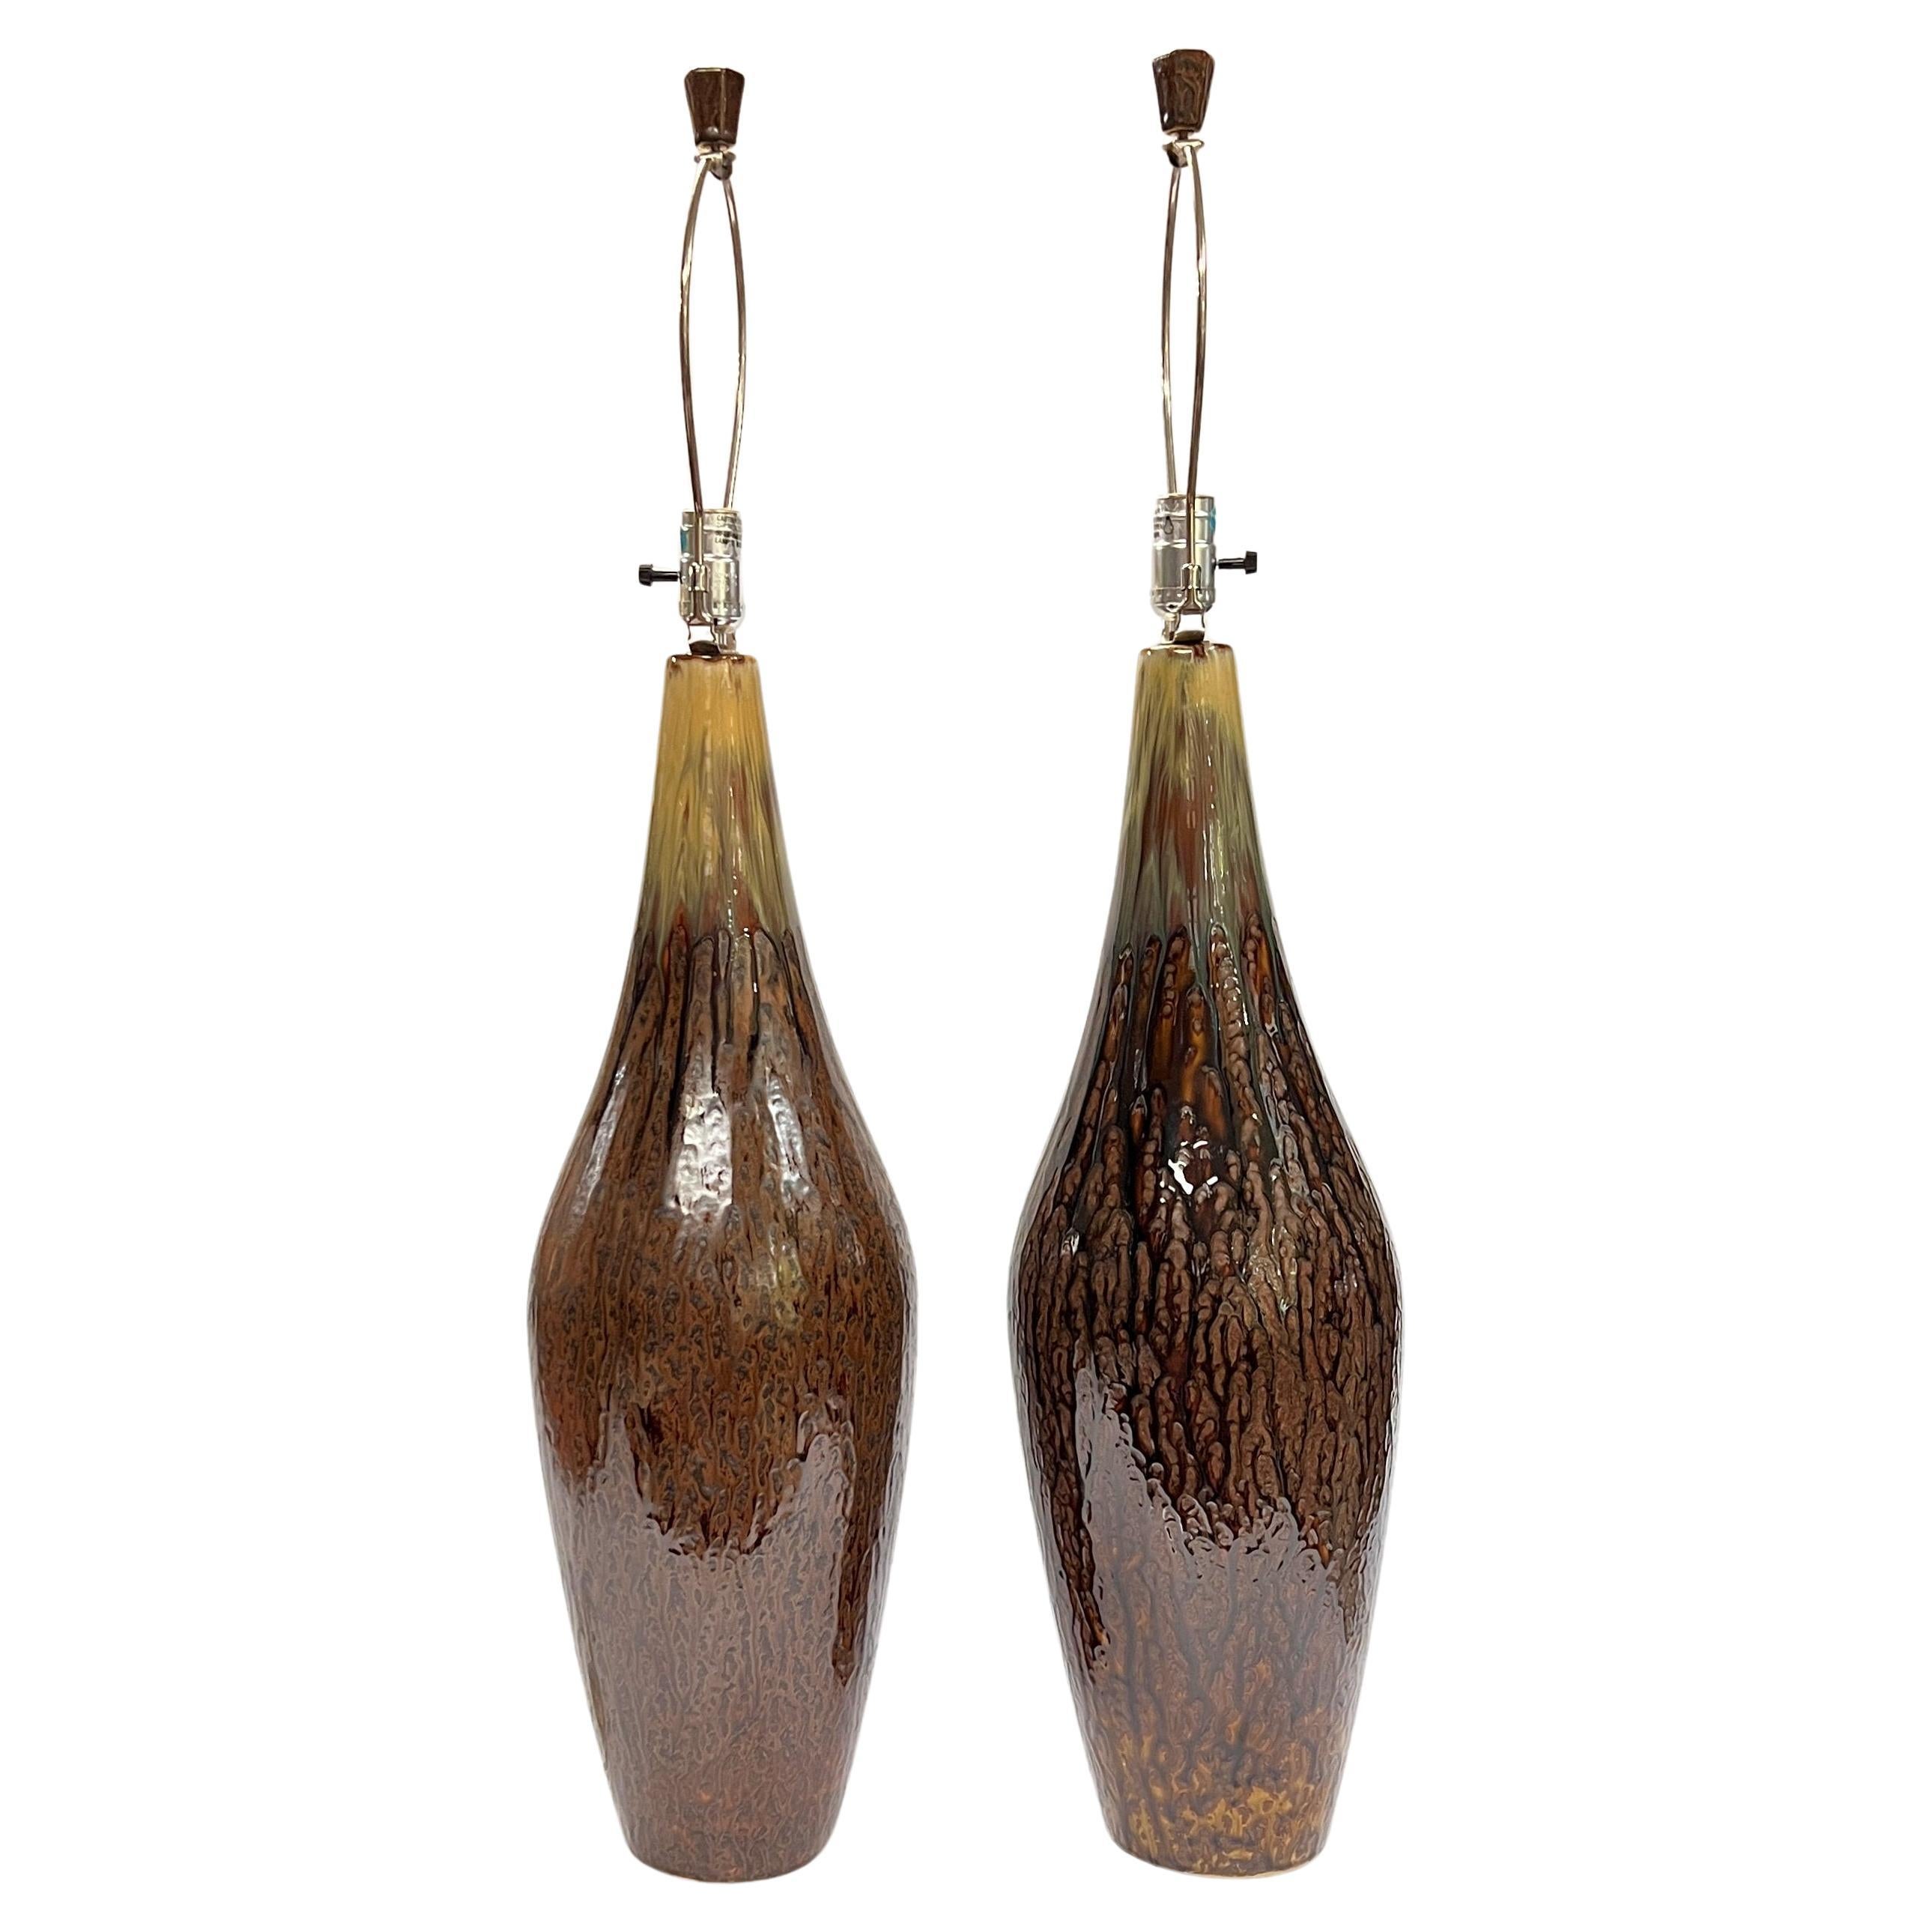 Pair Mid-Century Modern Amber and Brown Glazed Ceramic Table Lamps For Sale